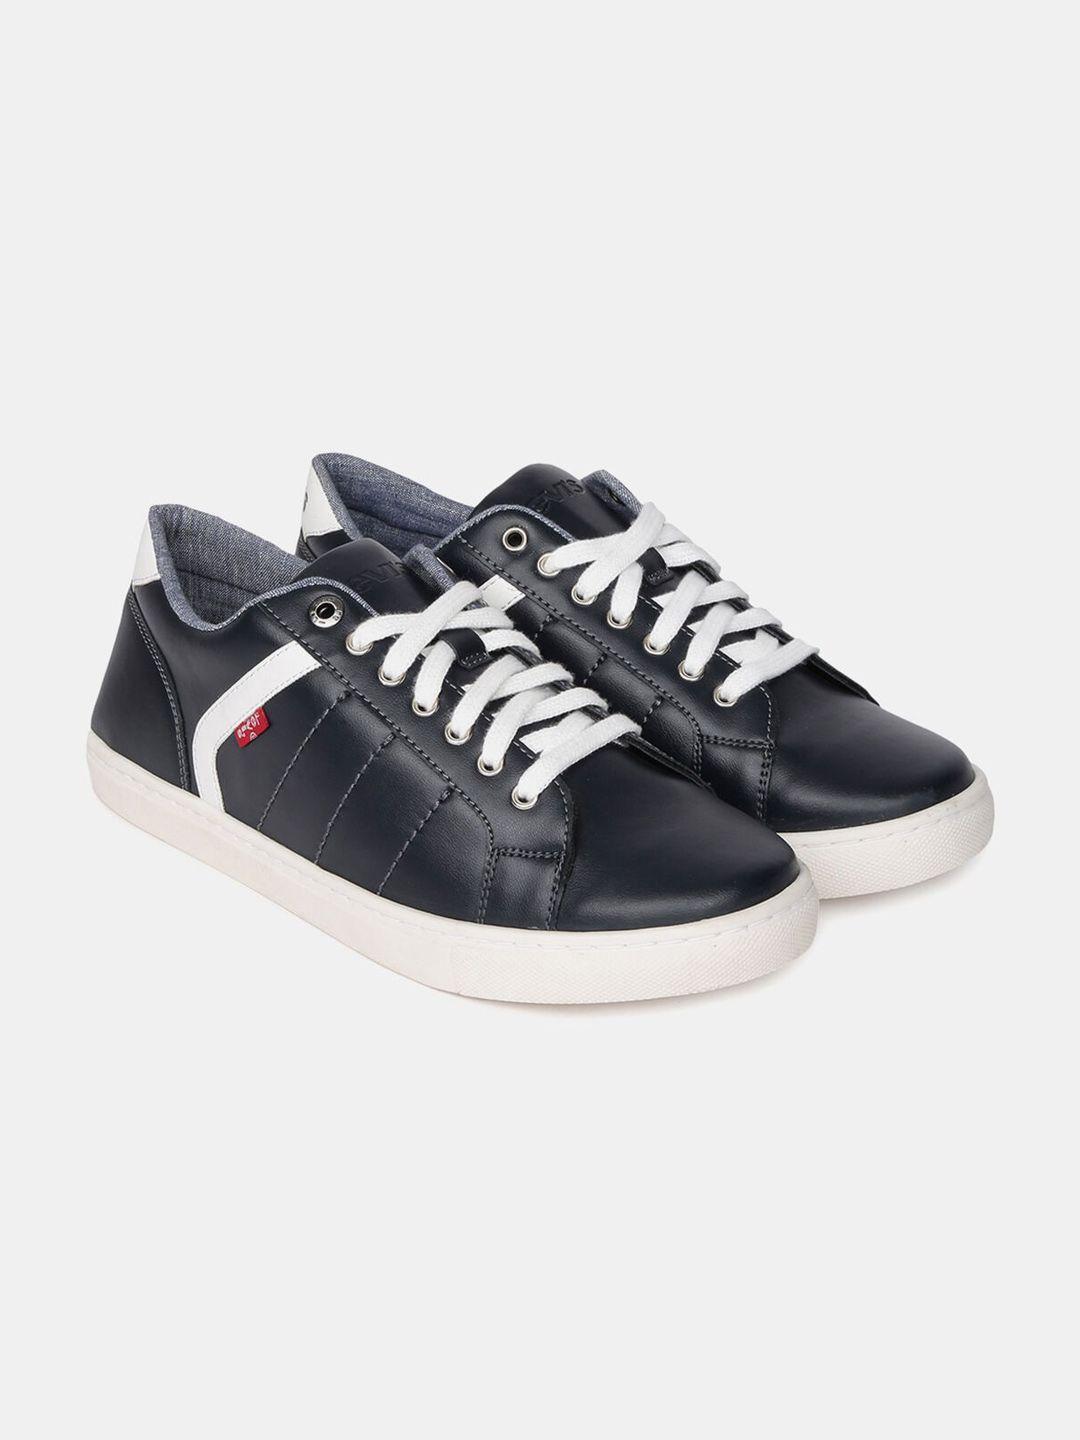 levis-men-lace-up-casual-sneakers